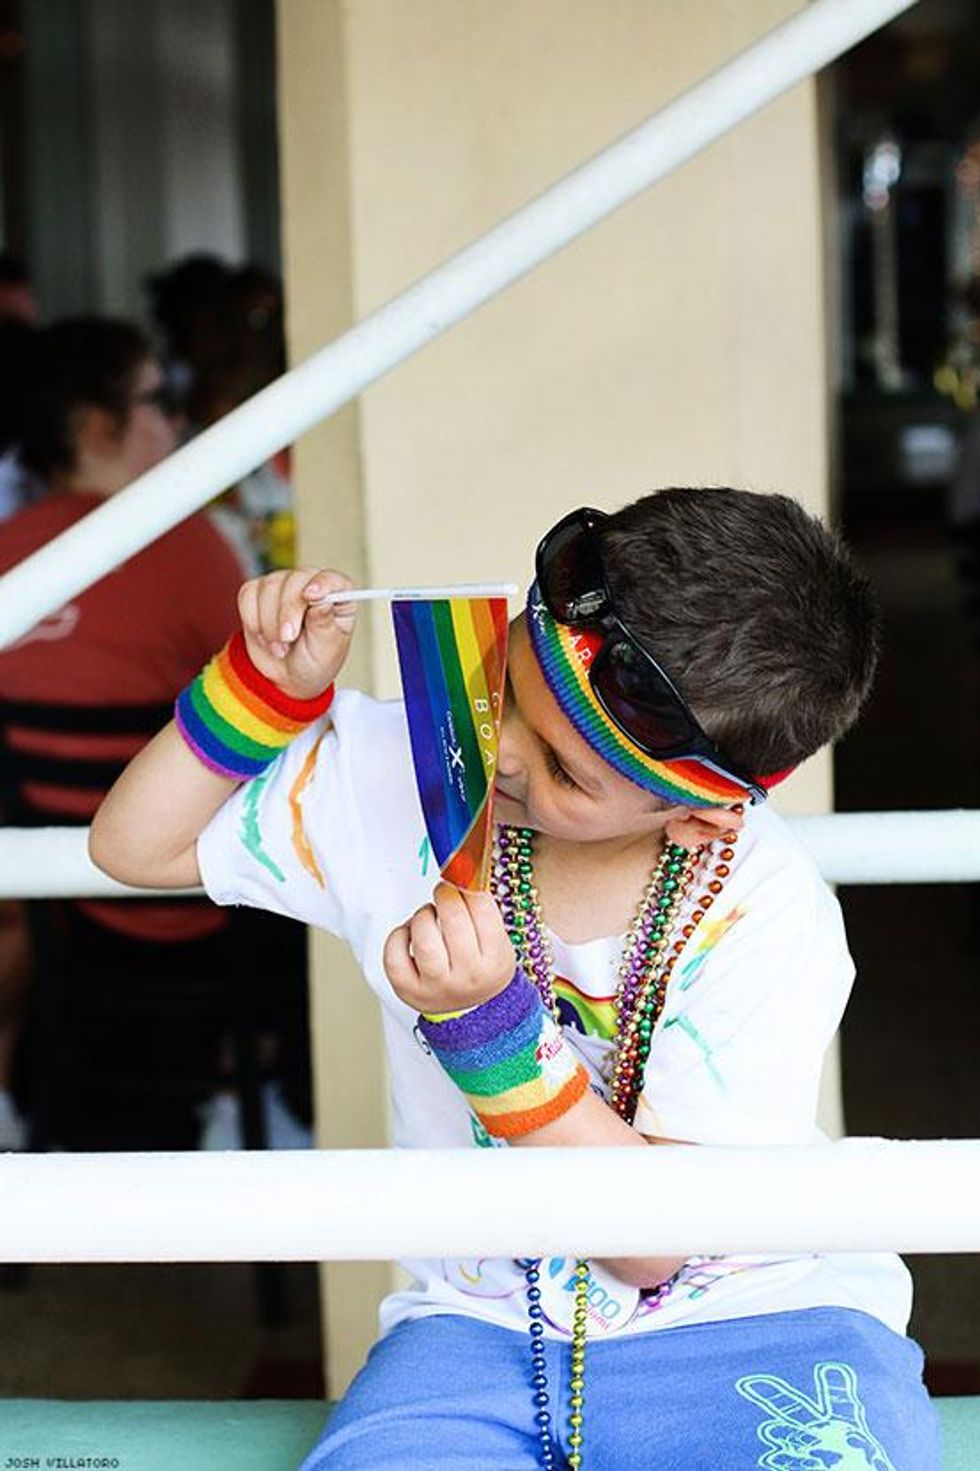 Eight Great Moments From Celebrity Cruises' Pride Celebrations